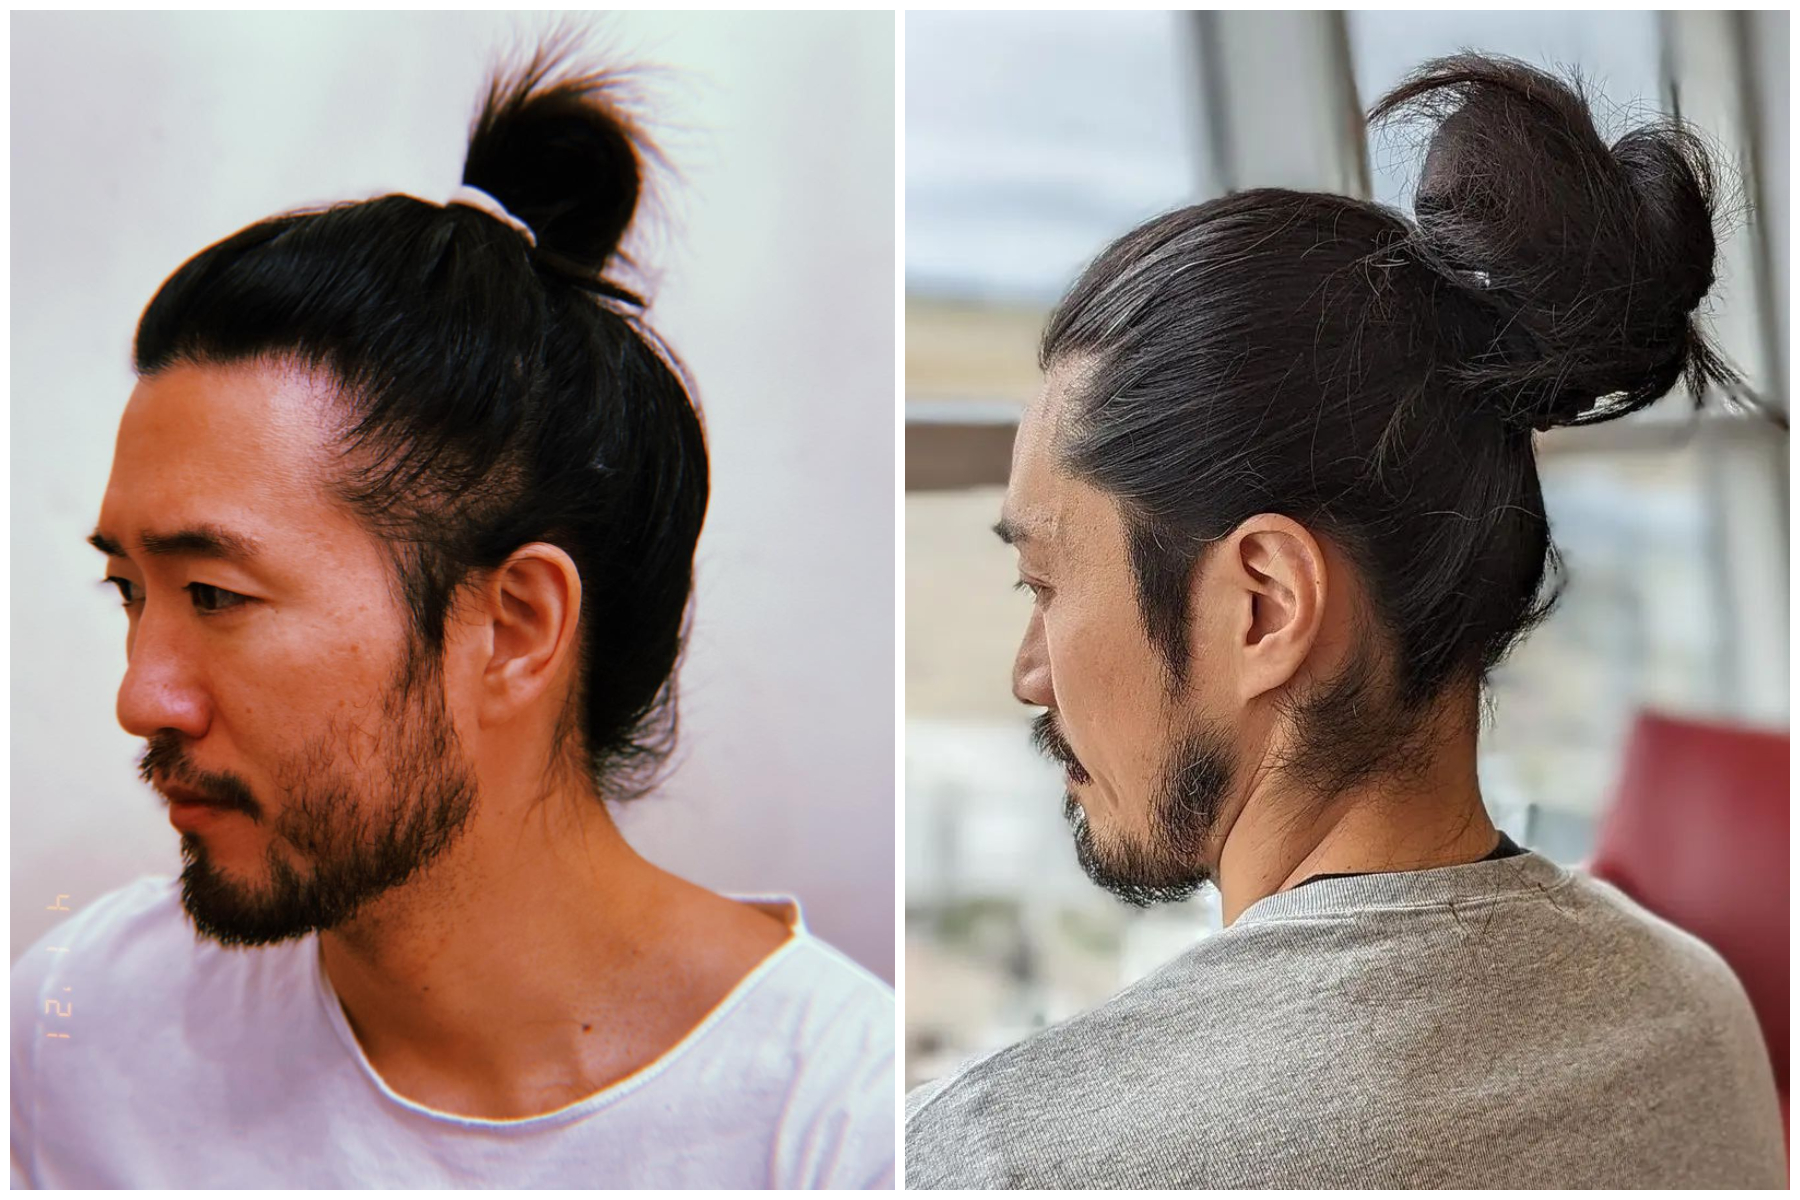 Standard Top Knot Hairstyles For Men To Try ⋆ Best Fashion Blog For Men -  TheUnstitchd.com